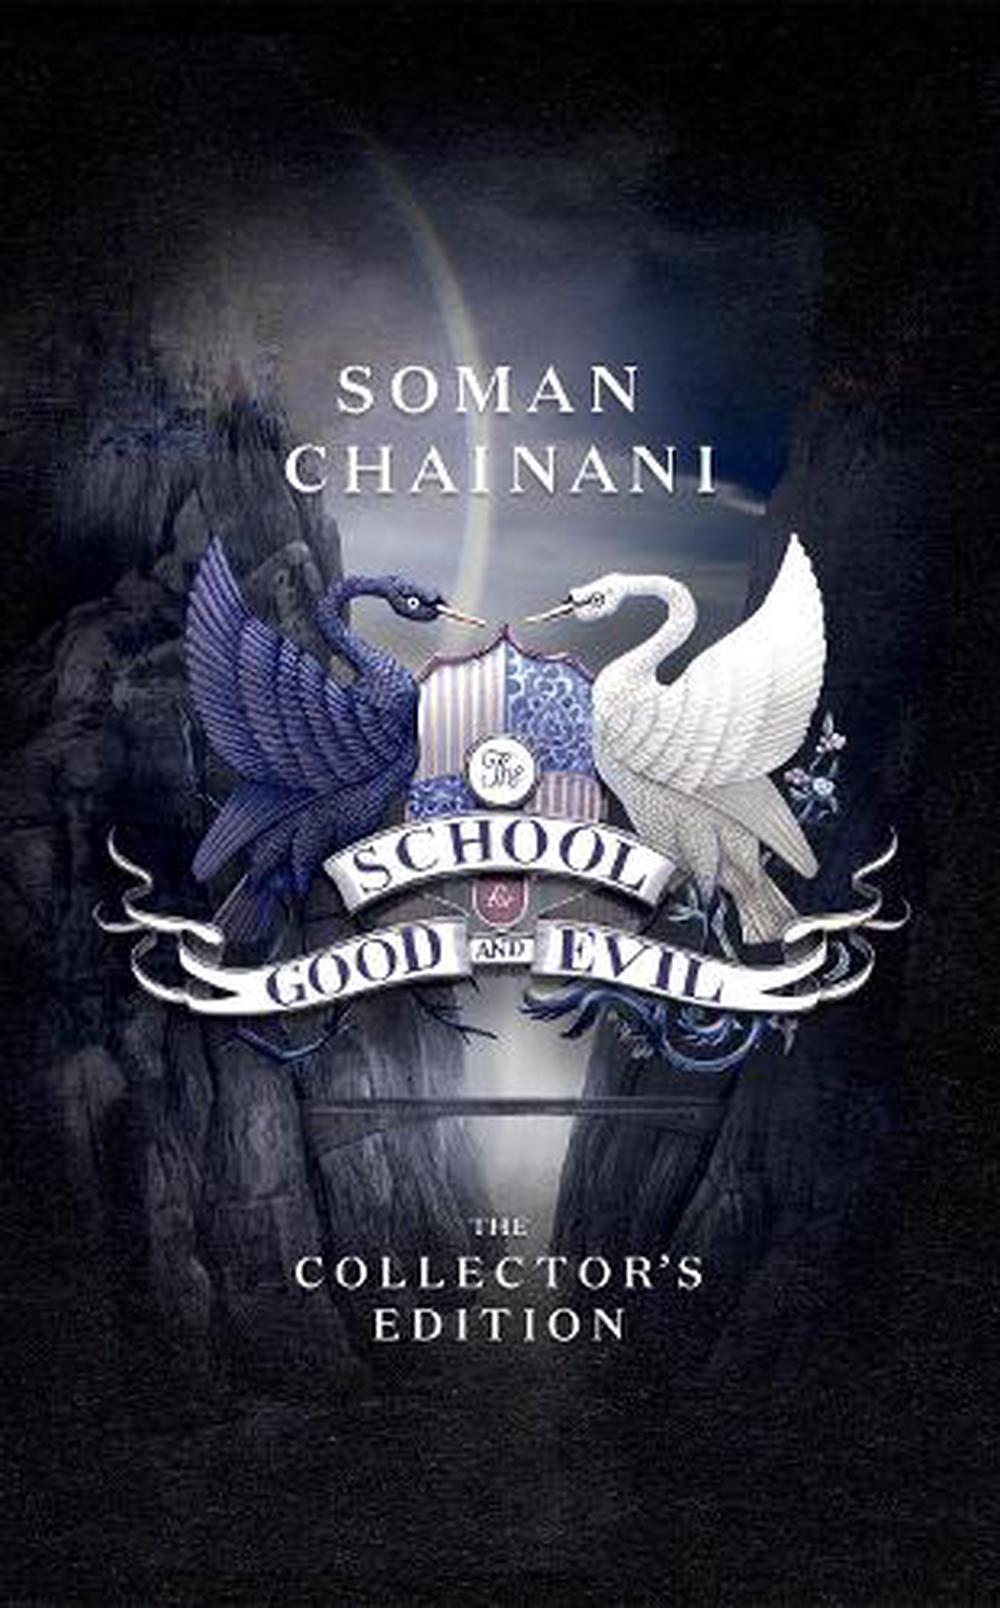 at　Hardcover,　for　Chainani,　online　and　School　by　Evil　Good　Buy　The　Soman　9780008532826　Nile